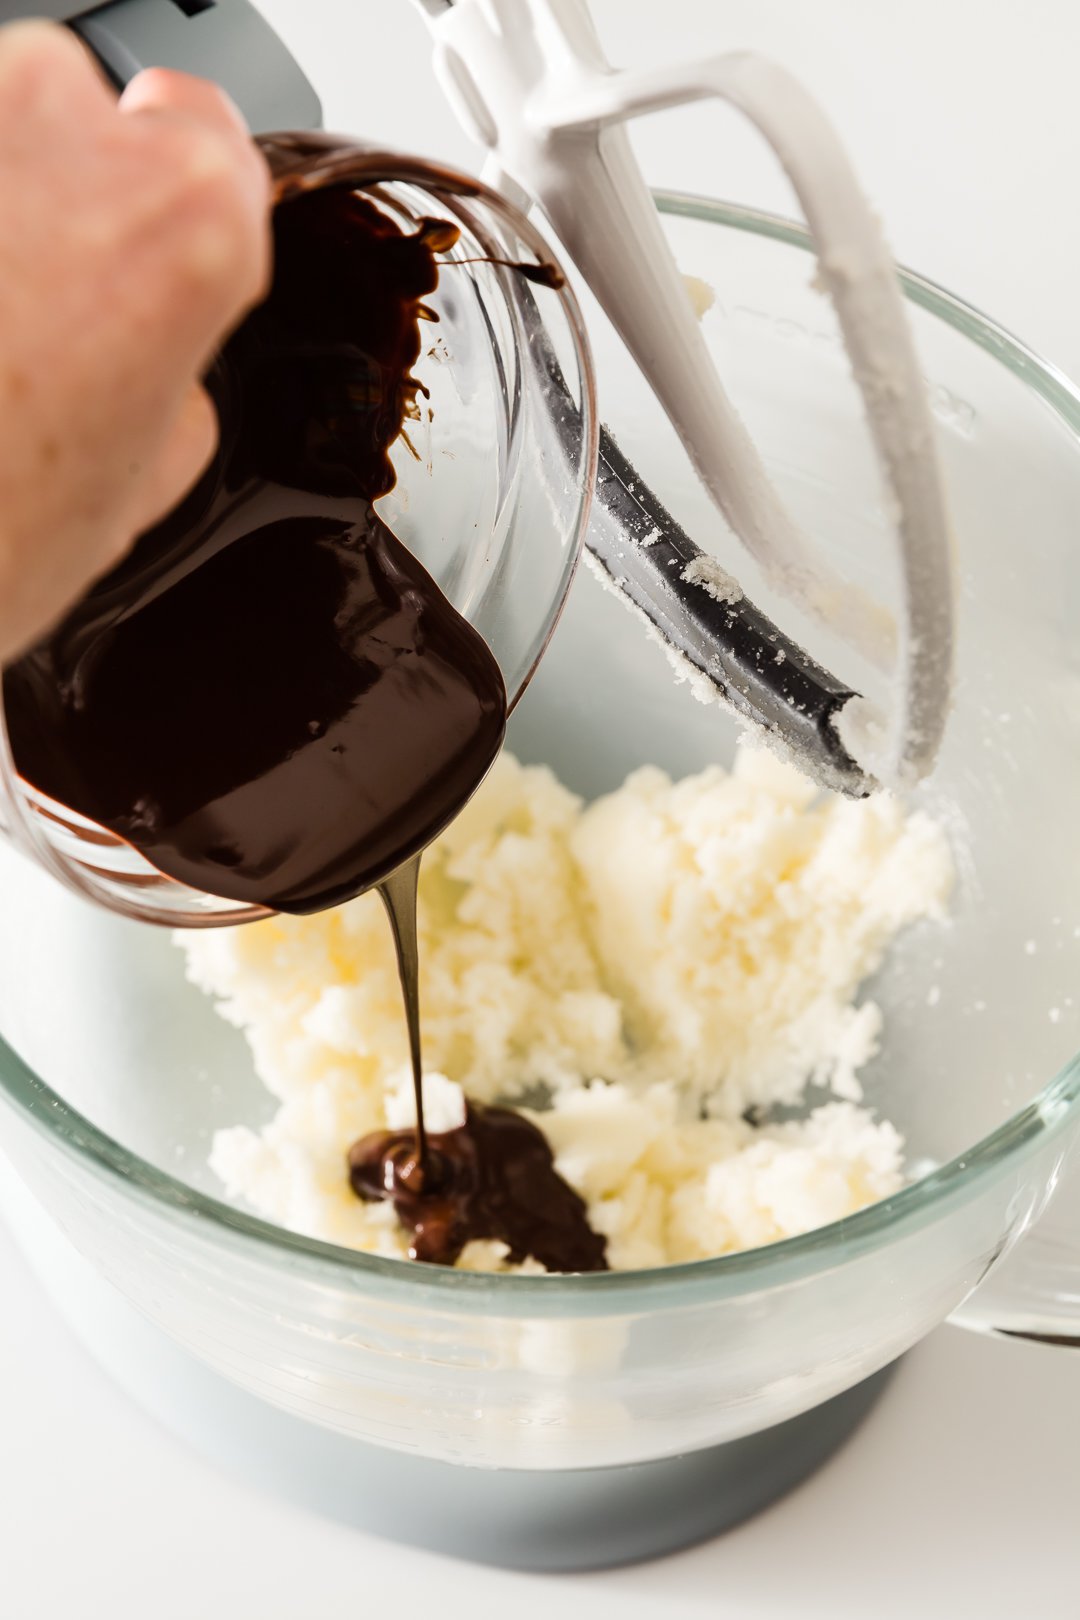 Adding melted chocolate to chocolate cupcake batter